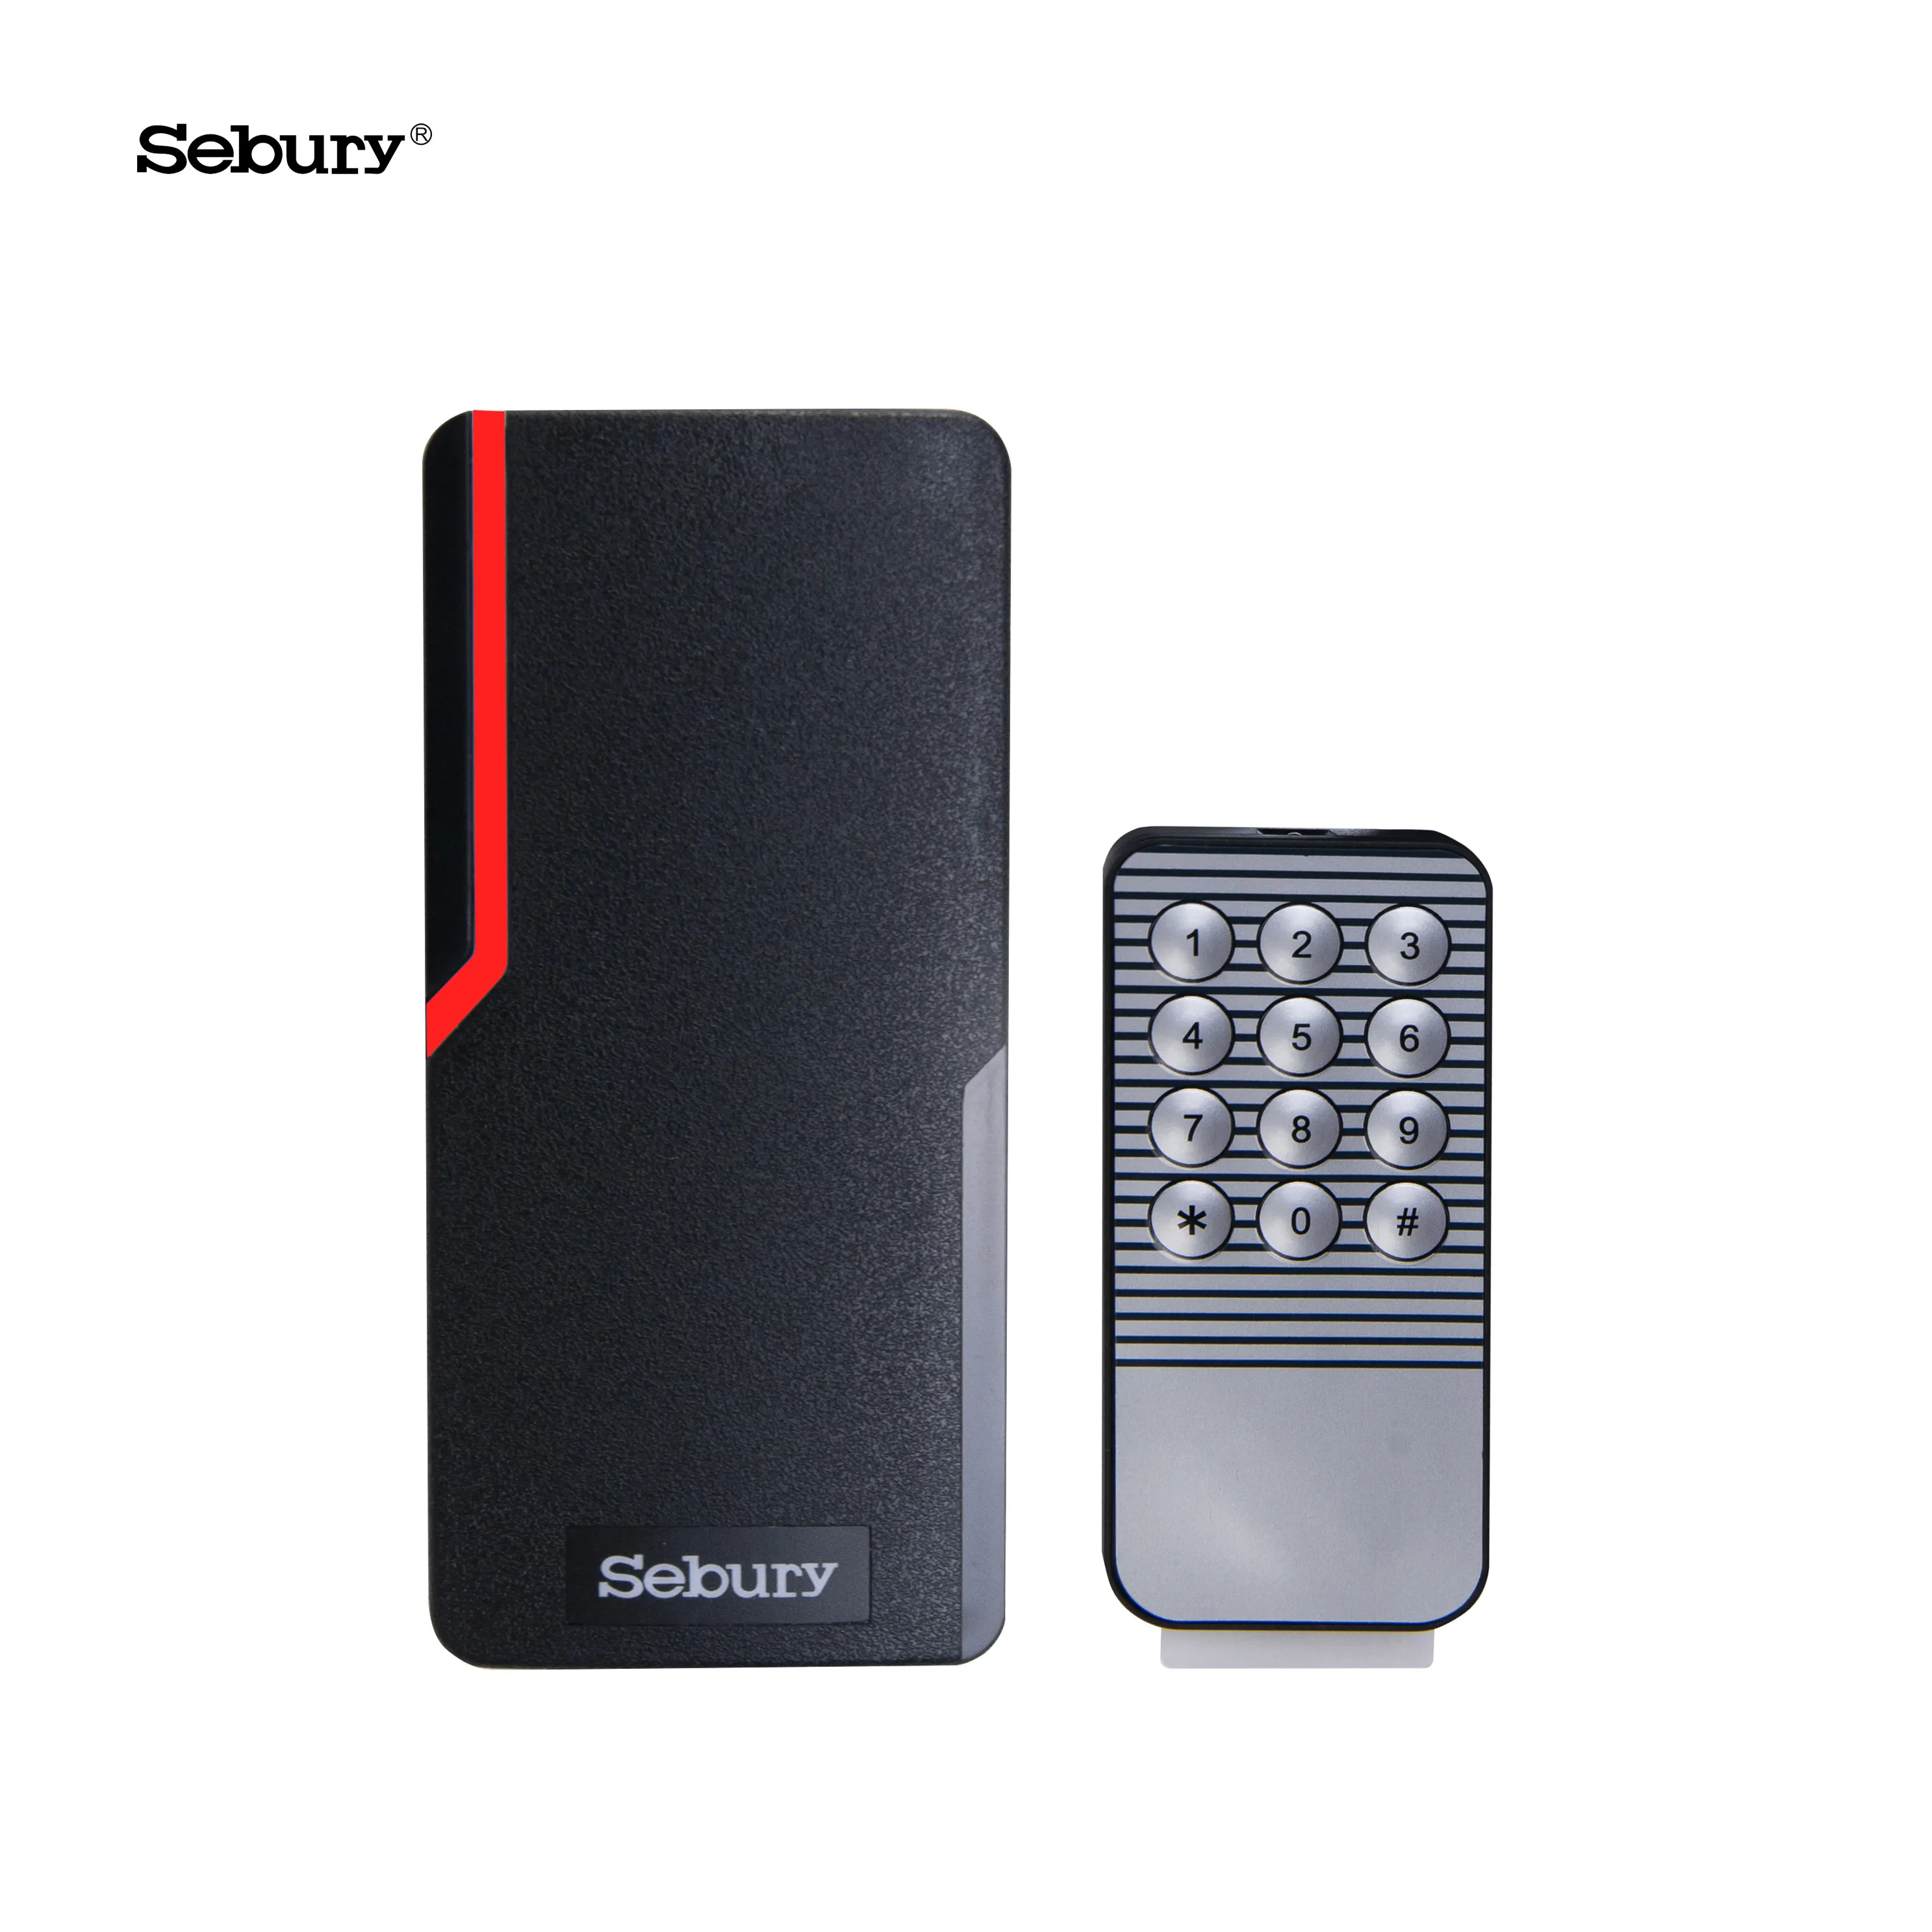 Sebury Security Office Apartment Use W2-A Standalone Access Control 125KHz W26-37 with Card Reader